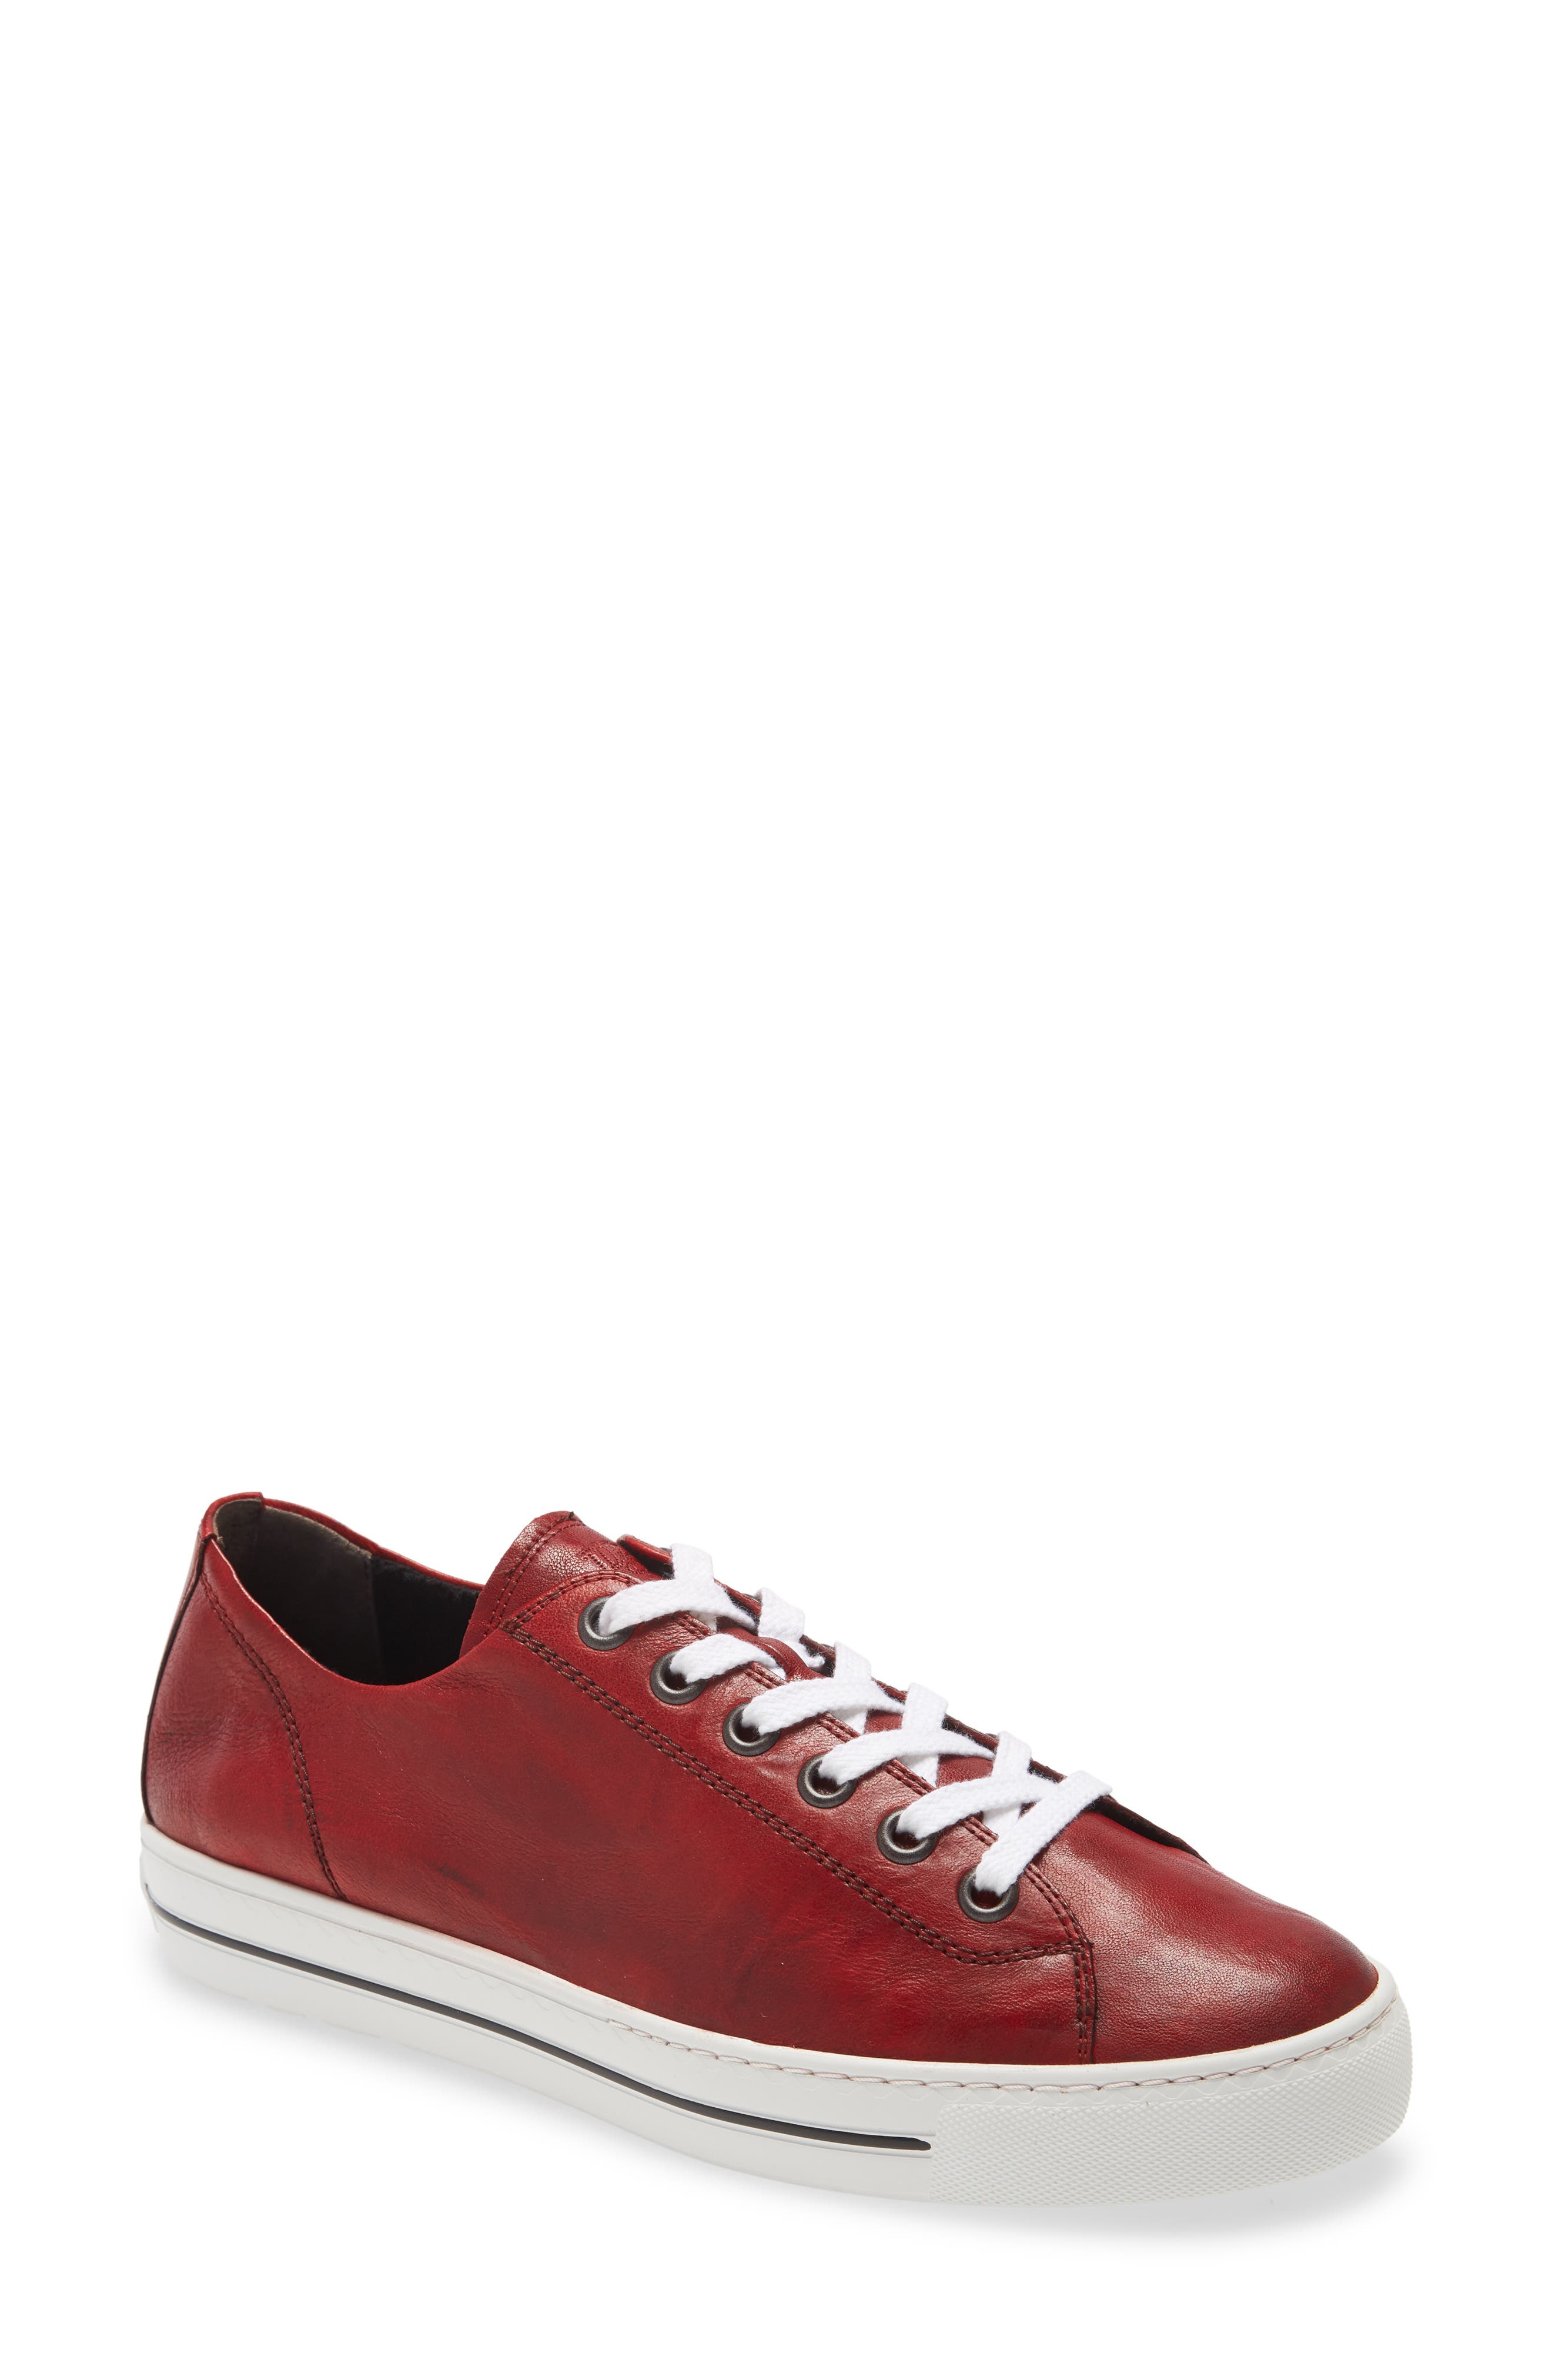 PAUL GREEN ALLY LEATHER LOW TOP SNEAKER,655325907901